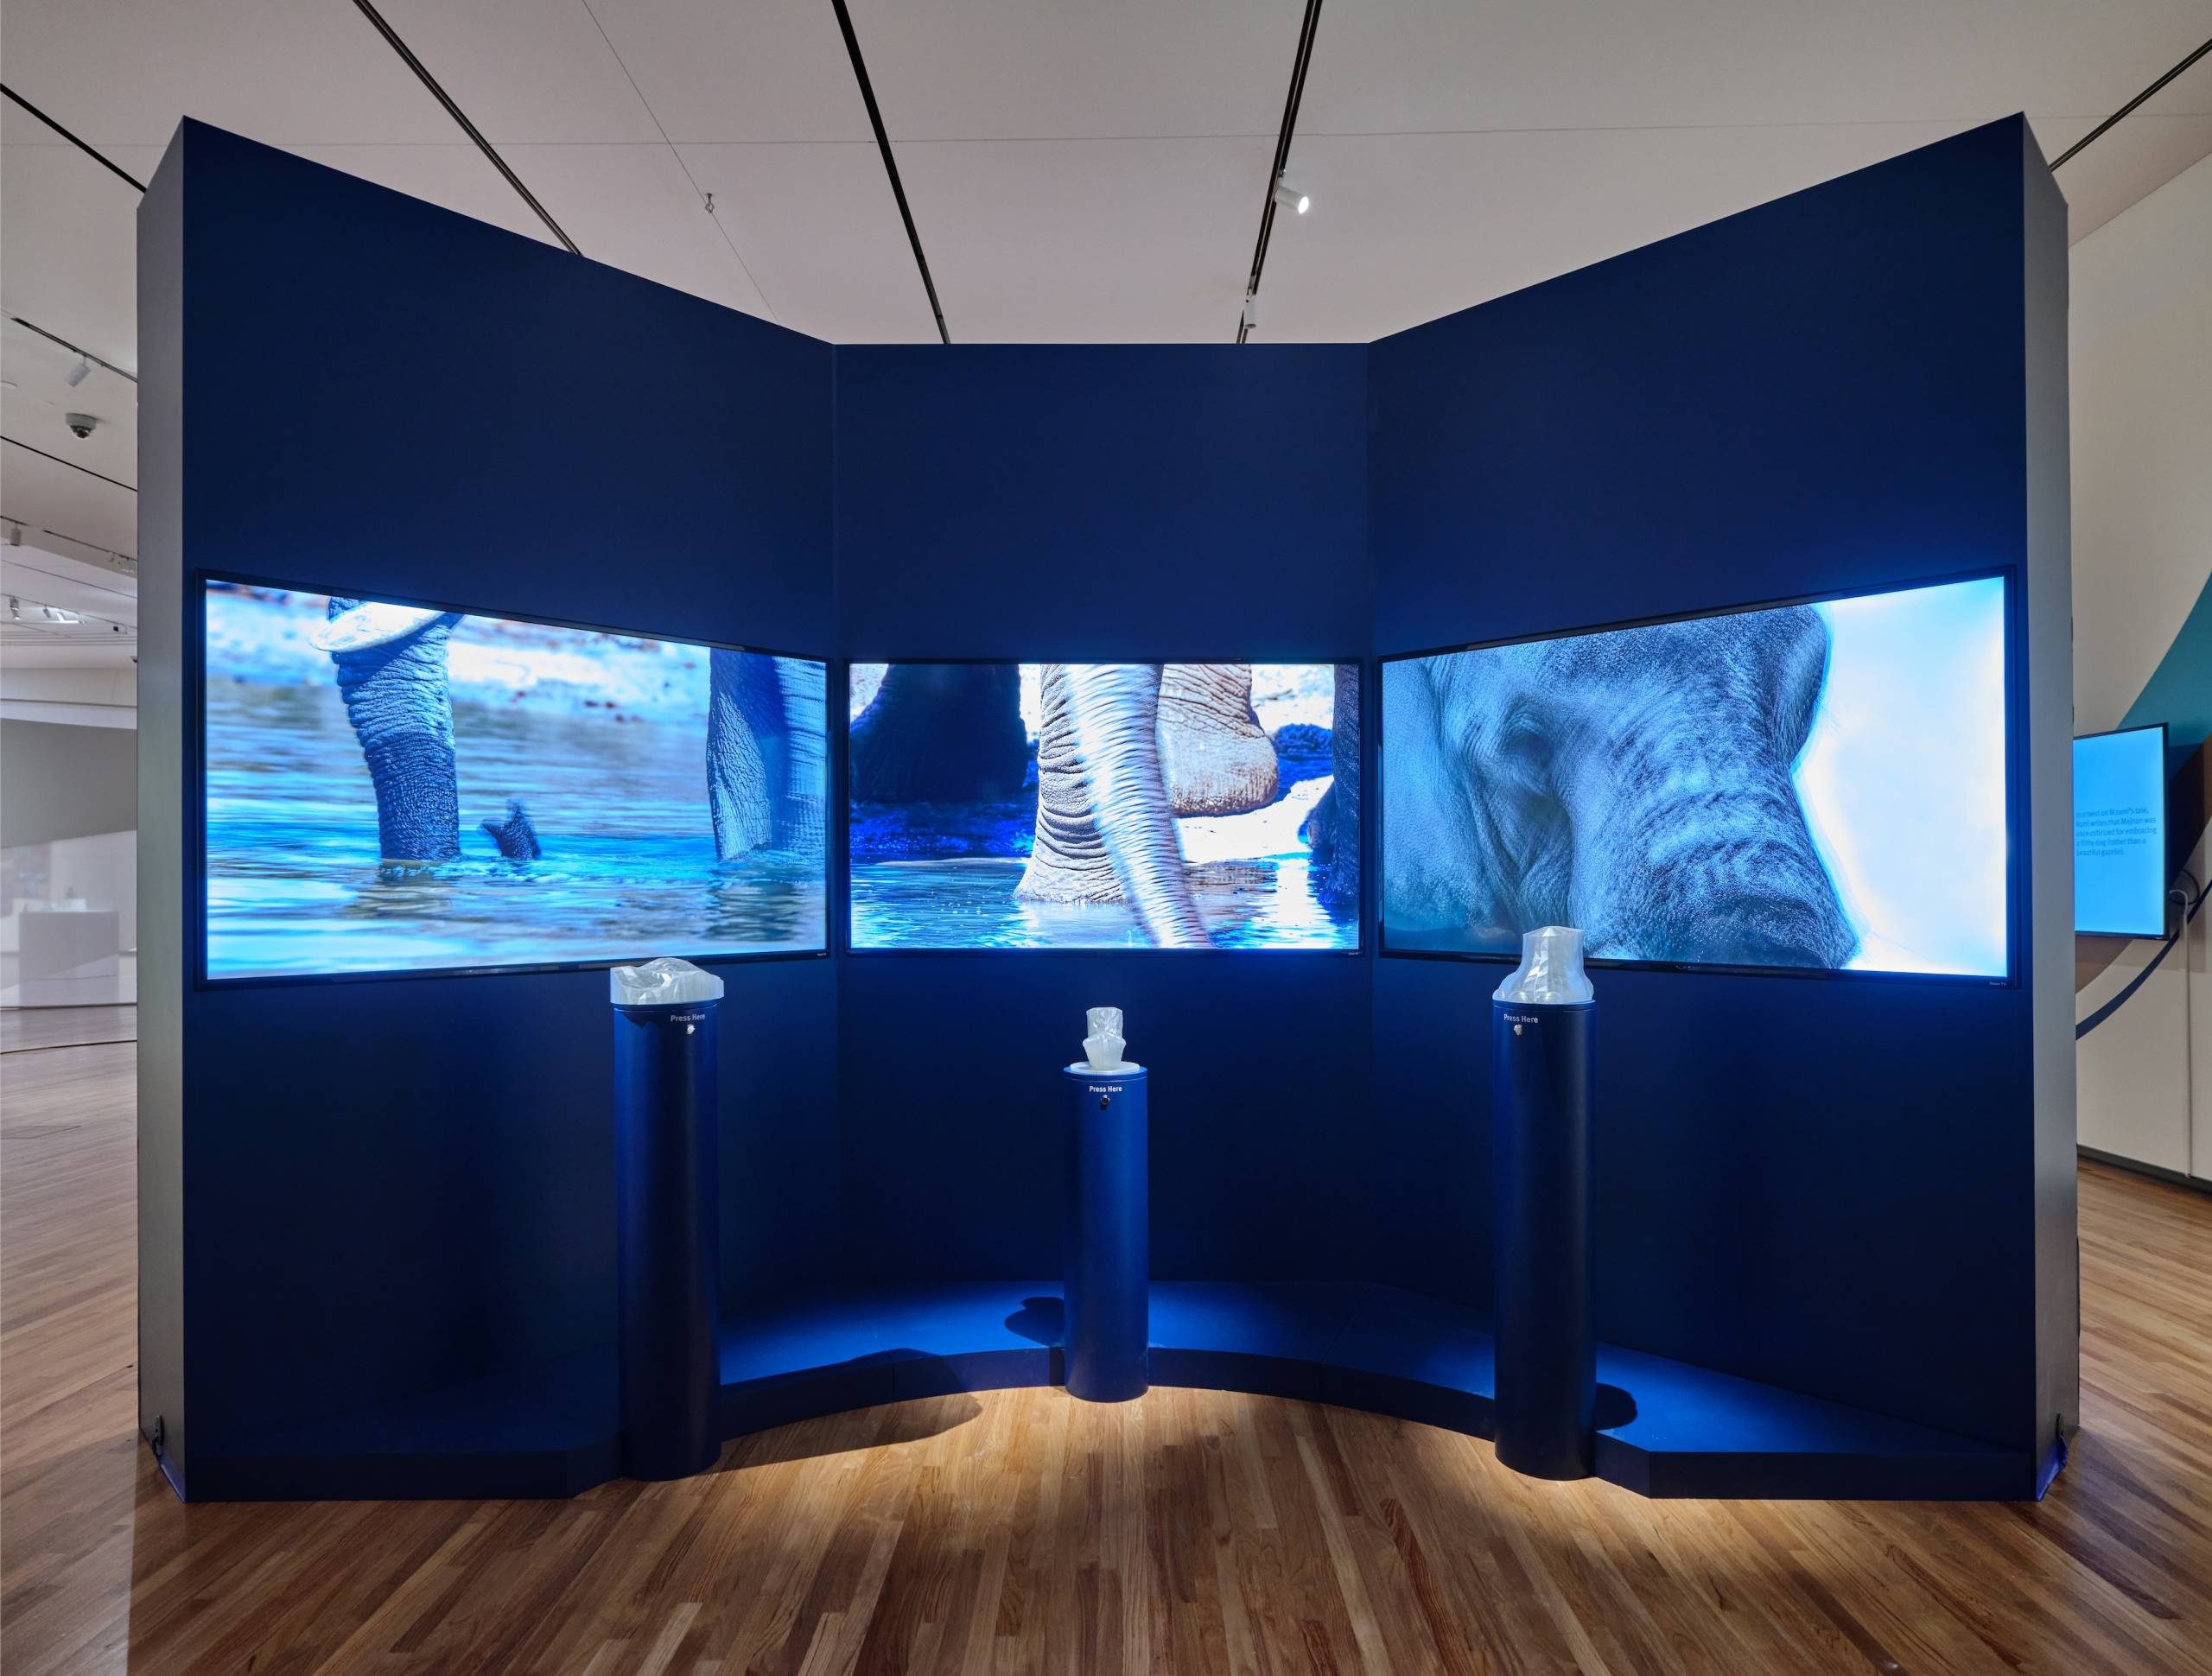 One side of an interactive installation consisting of a blue wall with three TV screens showing videoclips of elephants and in front of the screens there are three mounts with with items representing body parts of elephants and each mount has an button that plays an elephant sound